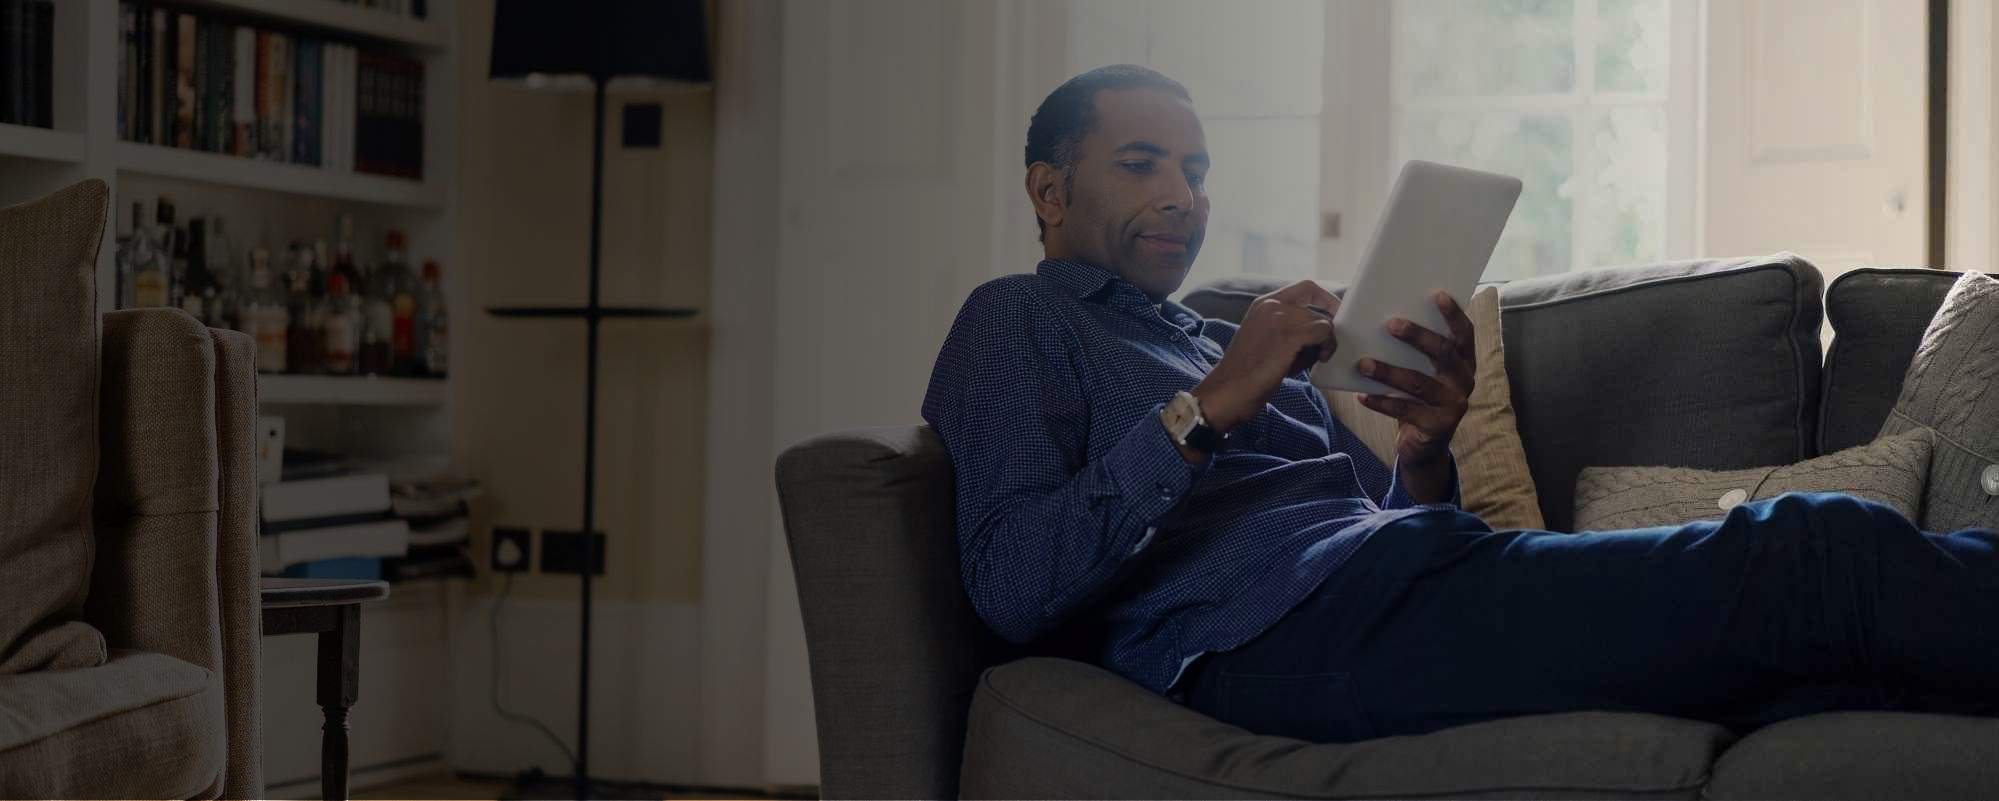 Man relaxing on sofa checking tablet